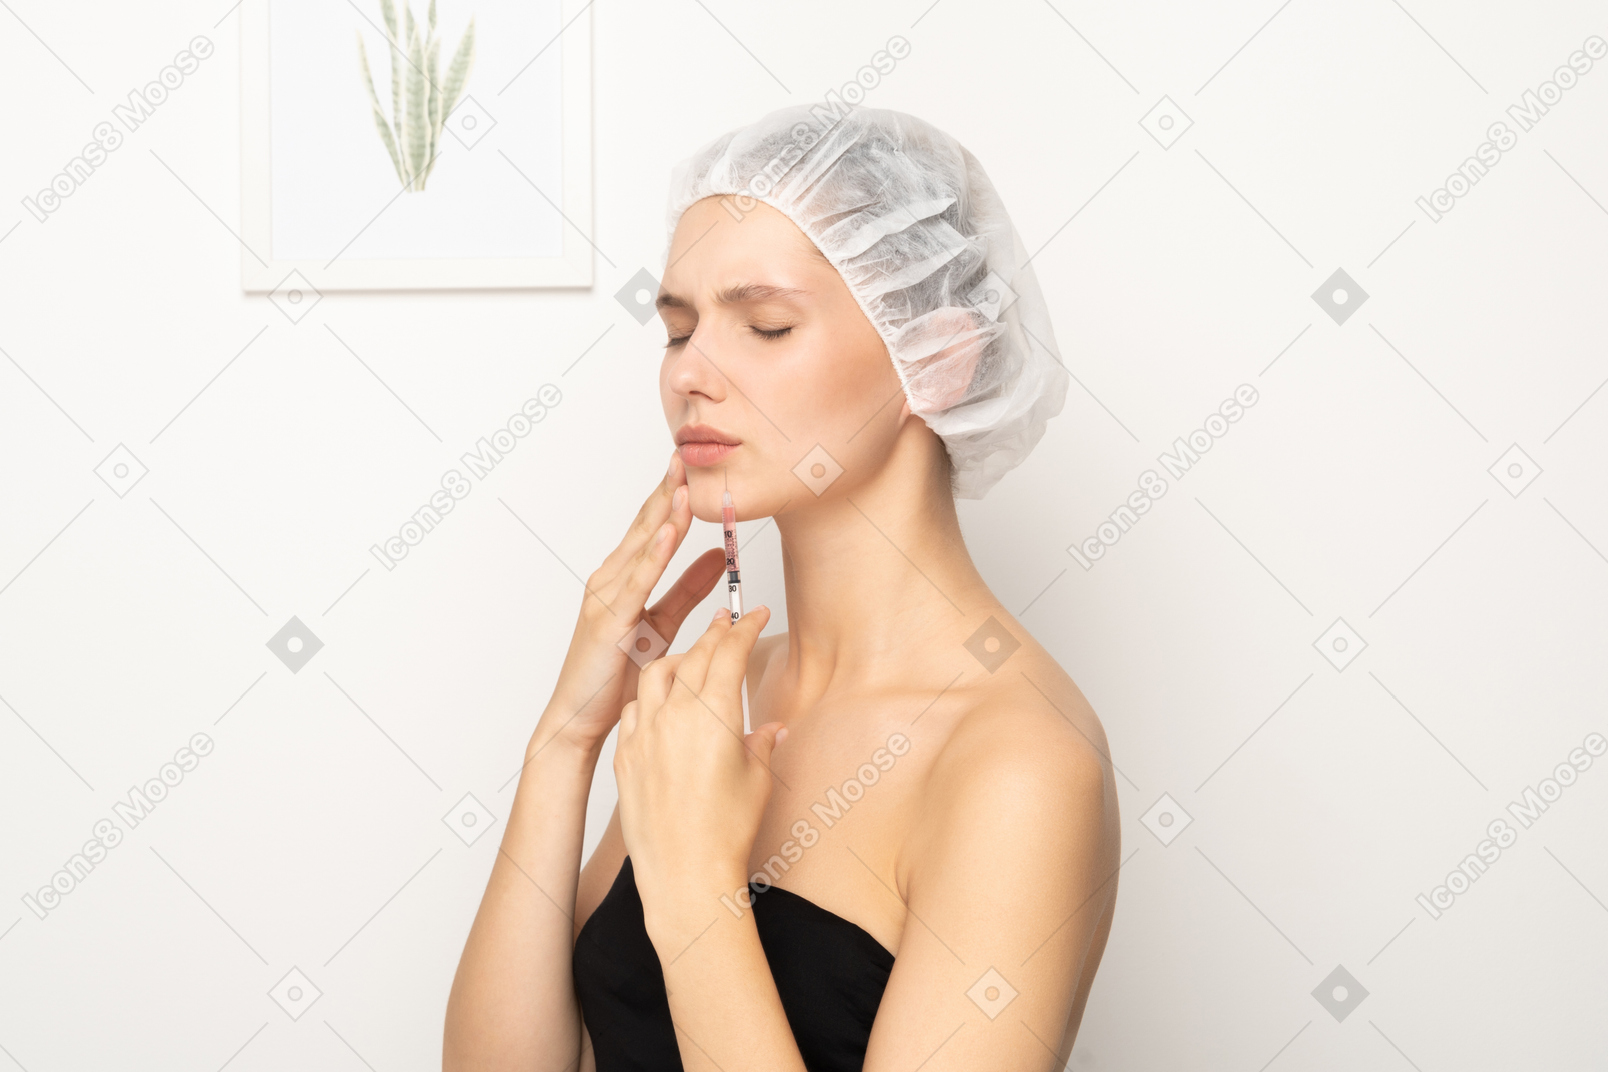 Young woman with closed eyes holding syringe and touching her face